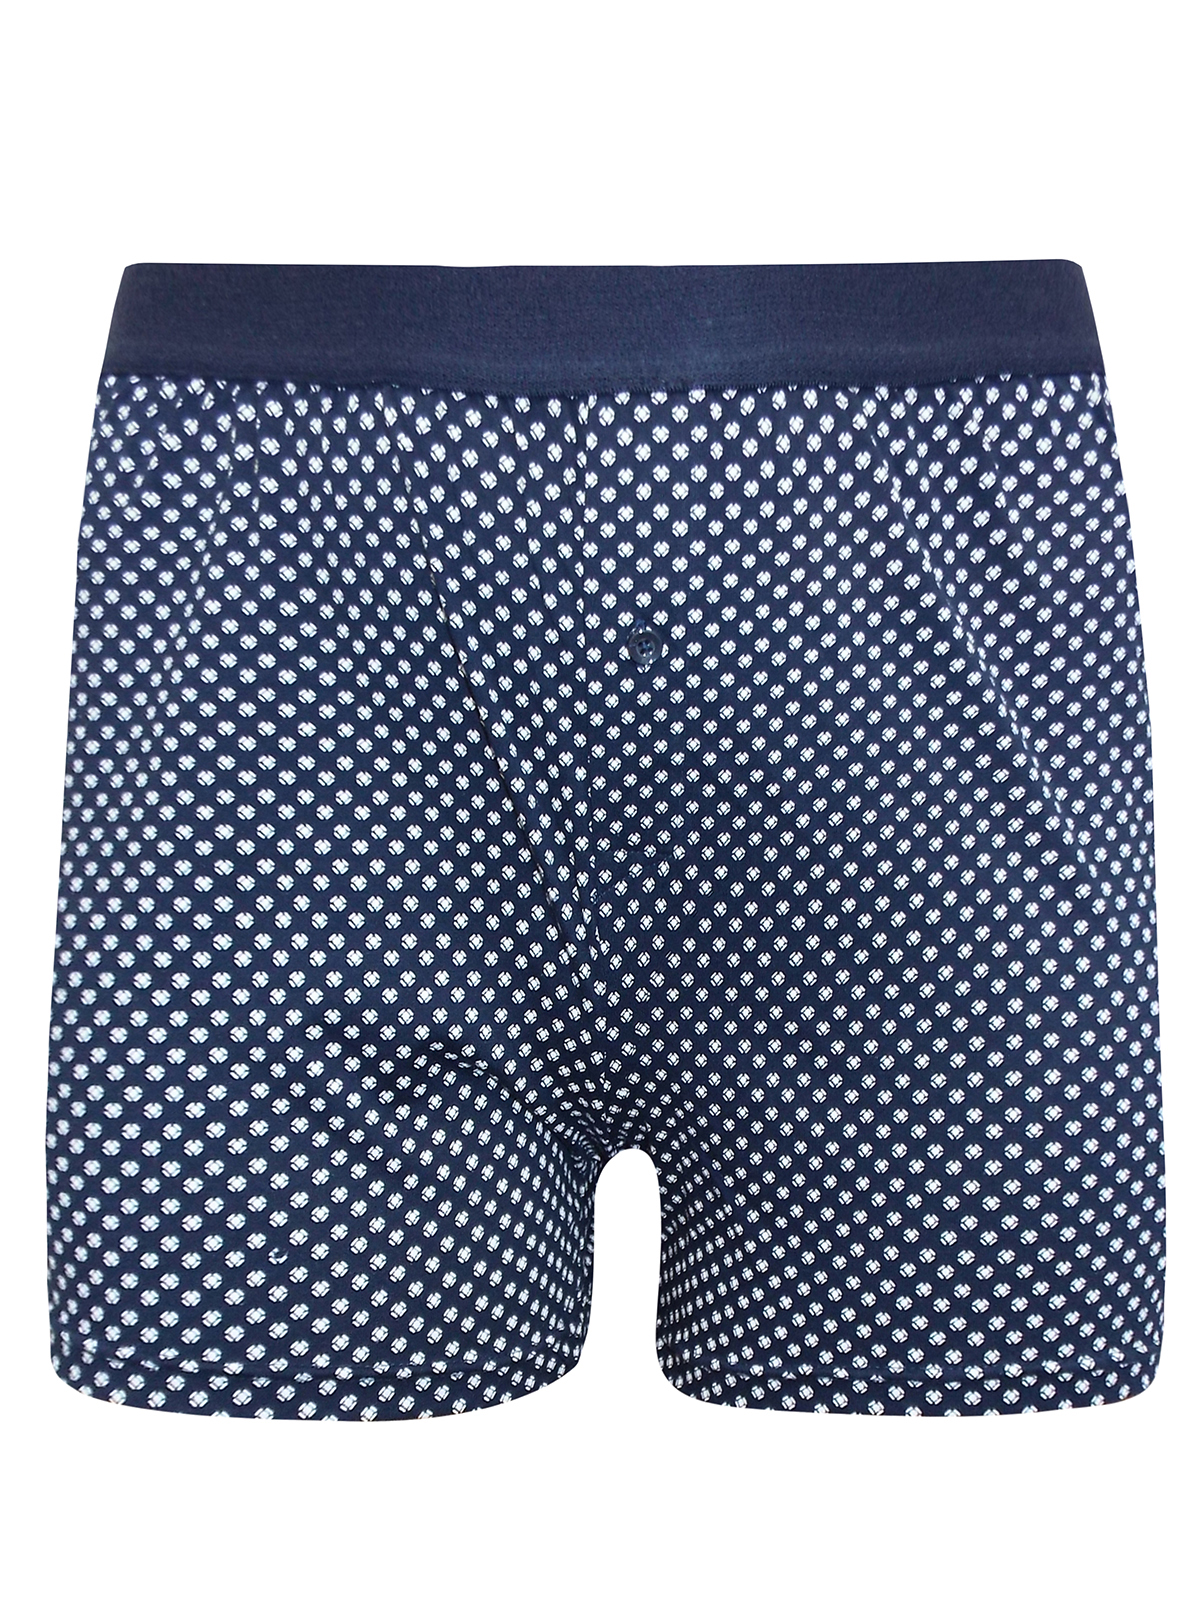 Marks and Spencer - - M&5 NAVY/WHITE Pure Cotton Cool & Fresh Spotted ...